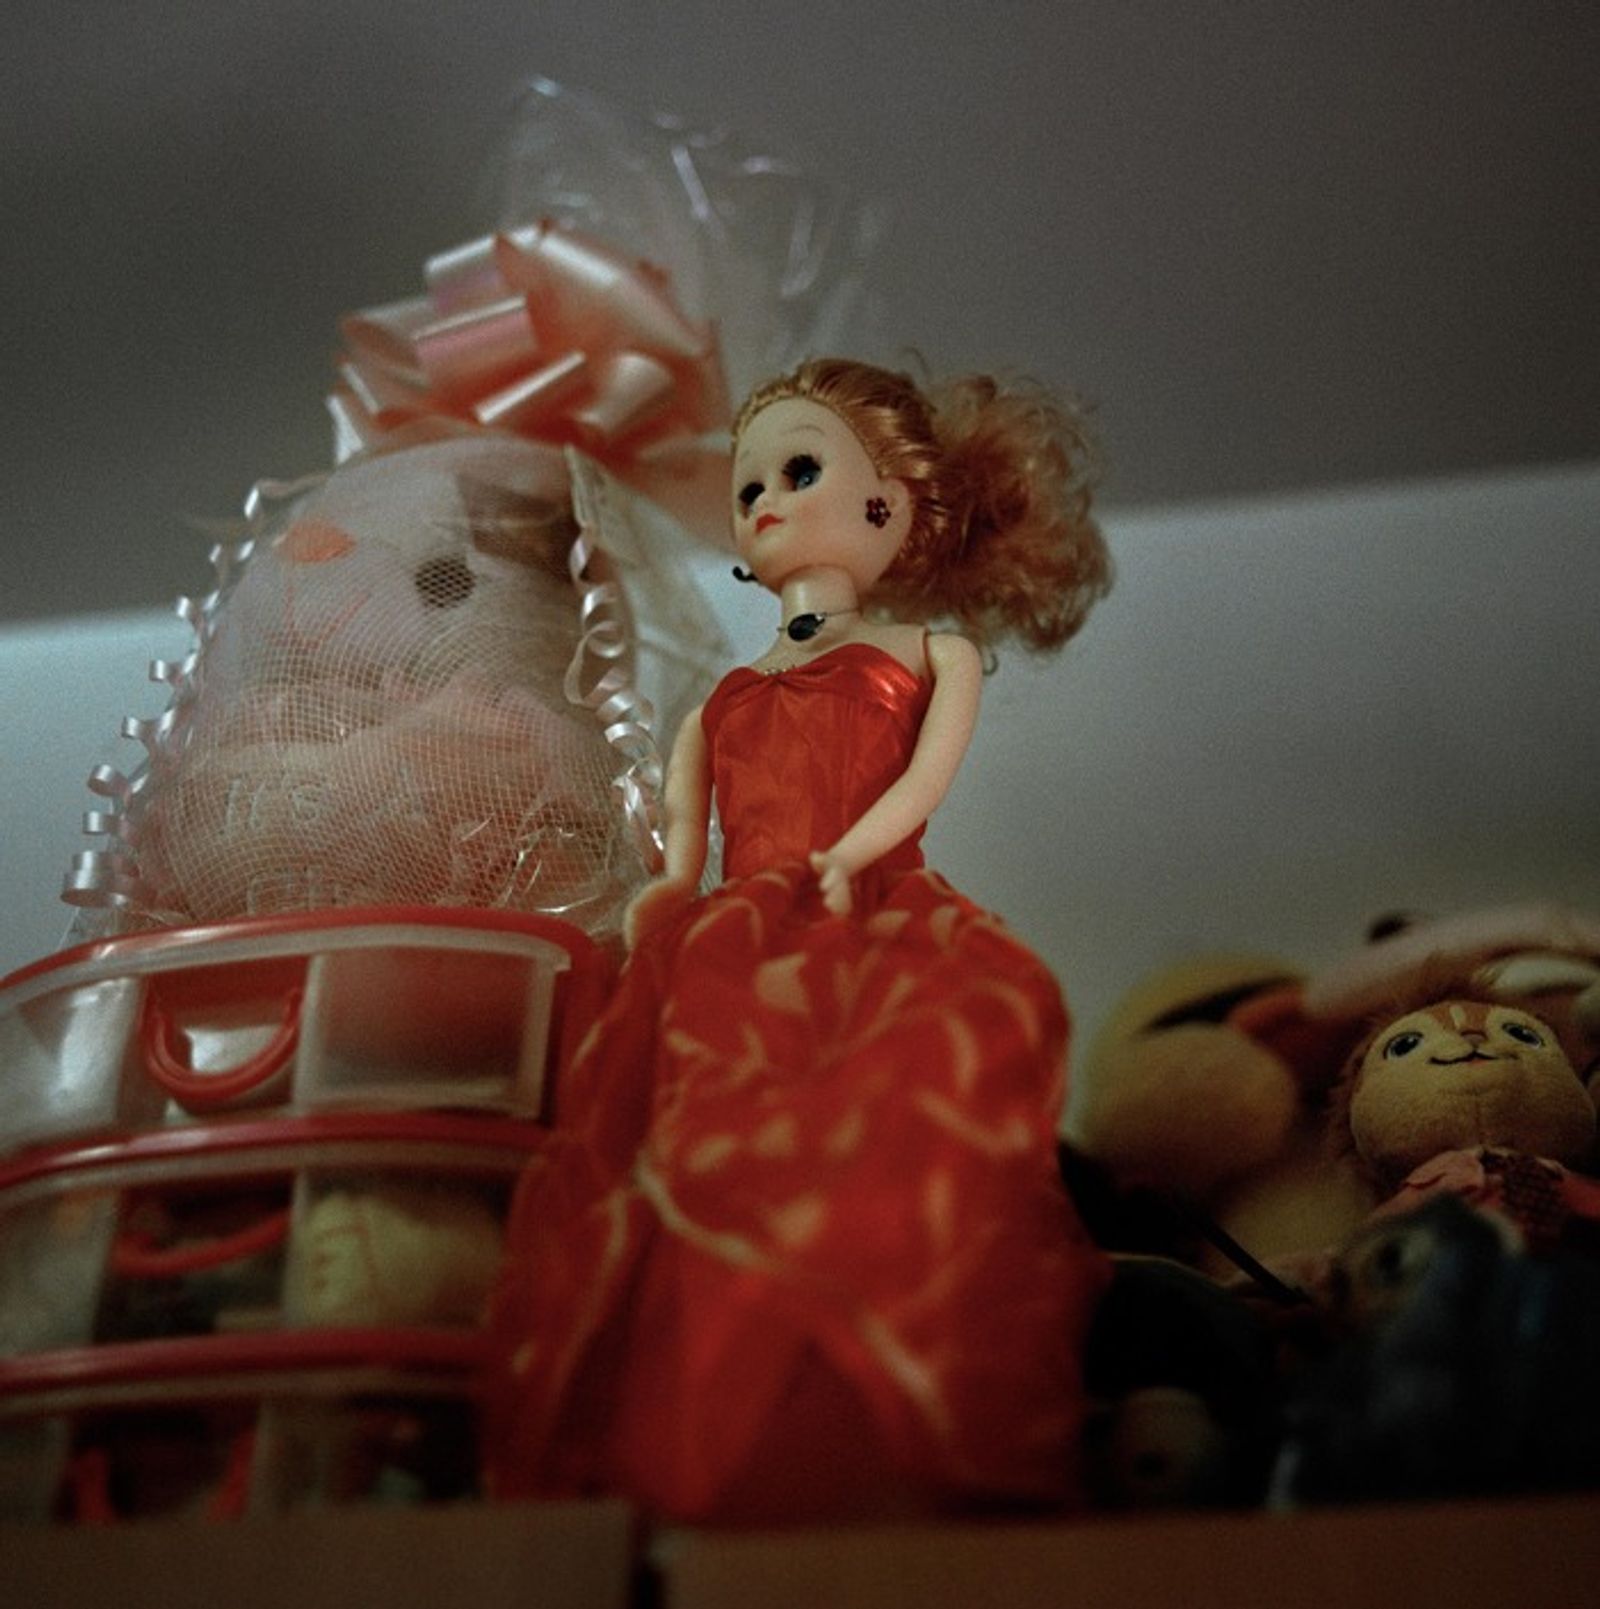 © Ruth Prieto - A barbie doll stands on the shelve.